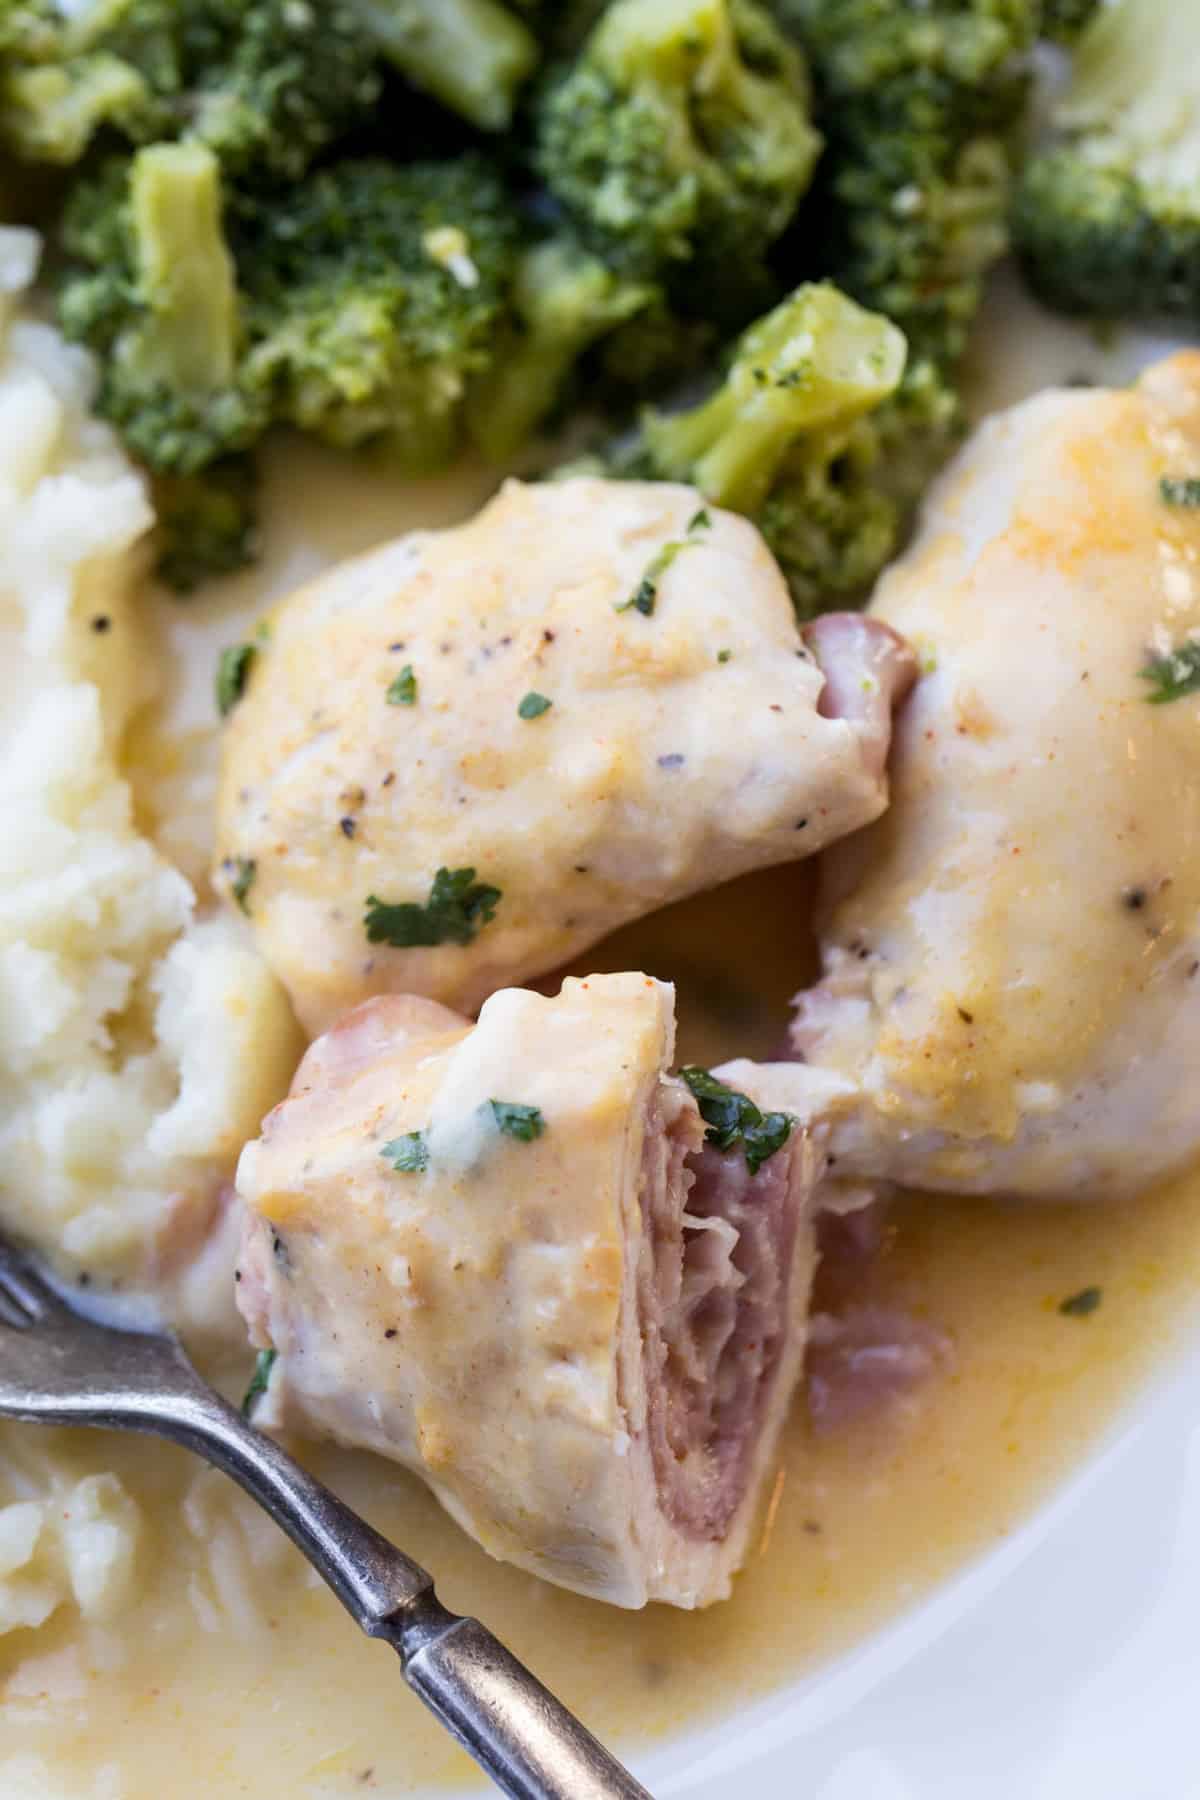 Chicken cordon bleu on a plate with a side of mashed potatoes and broccoli. Chicken rolled with ham and cheese.